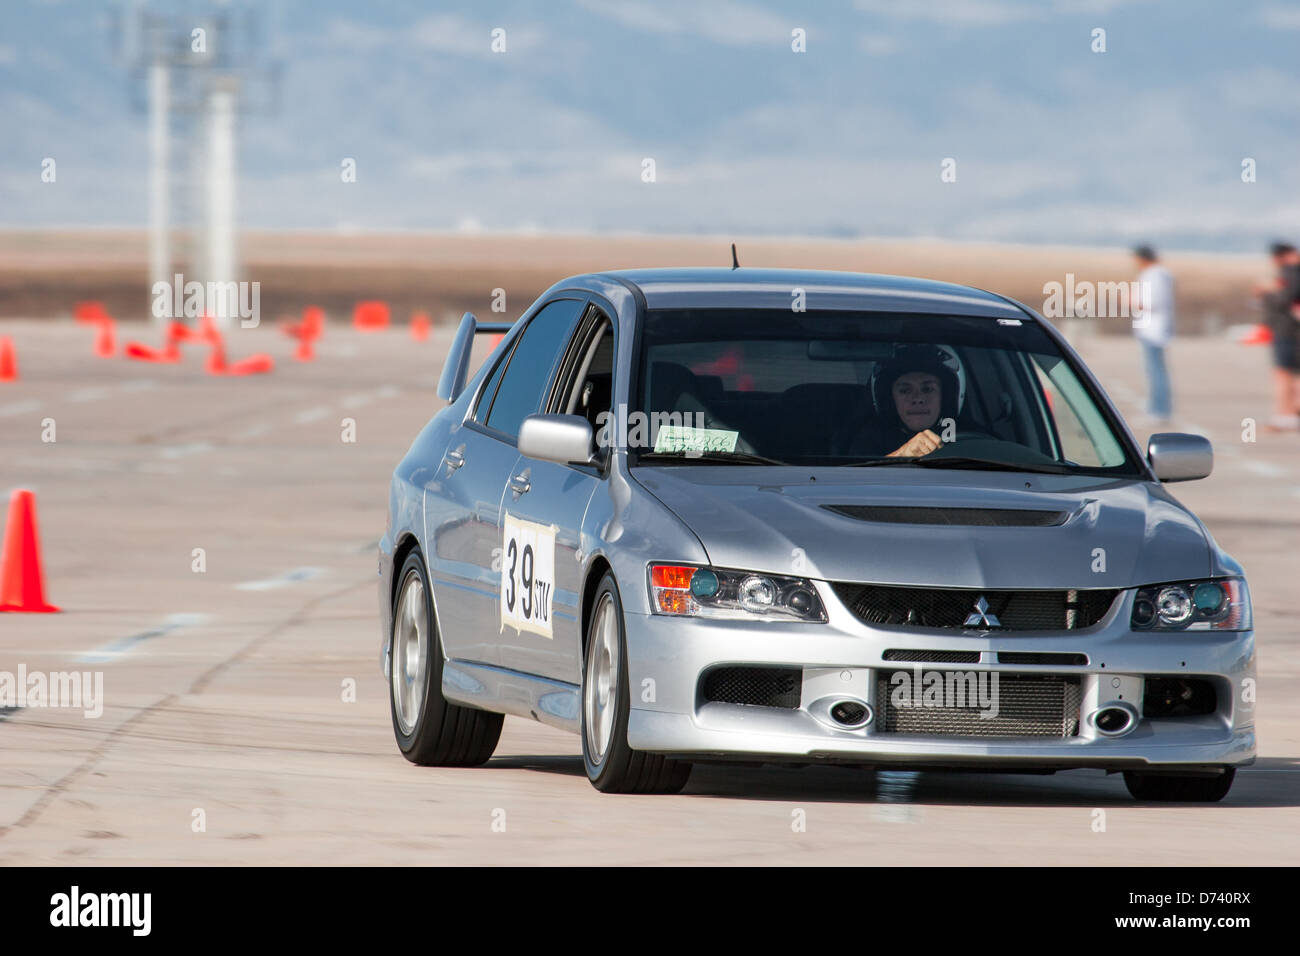 A 2006 Gray Mitsubishi Evolution 9 in an autocross race at a regional Sports Car Club of America (SCCA) event Stock Photo